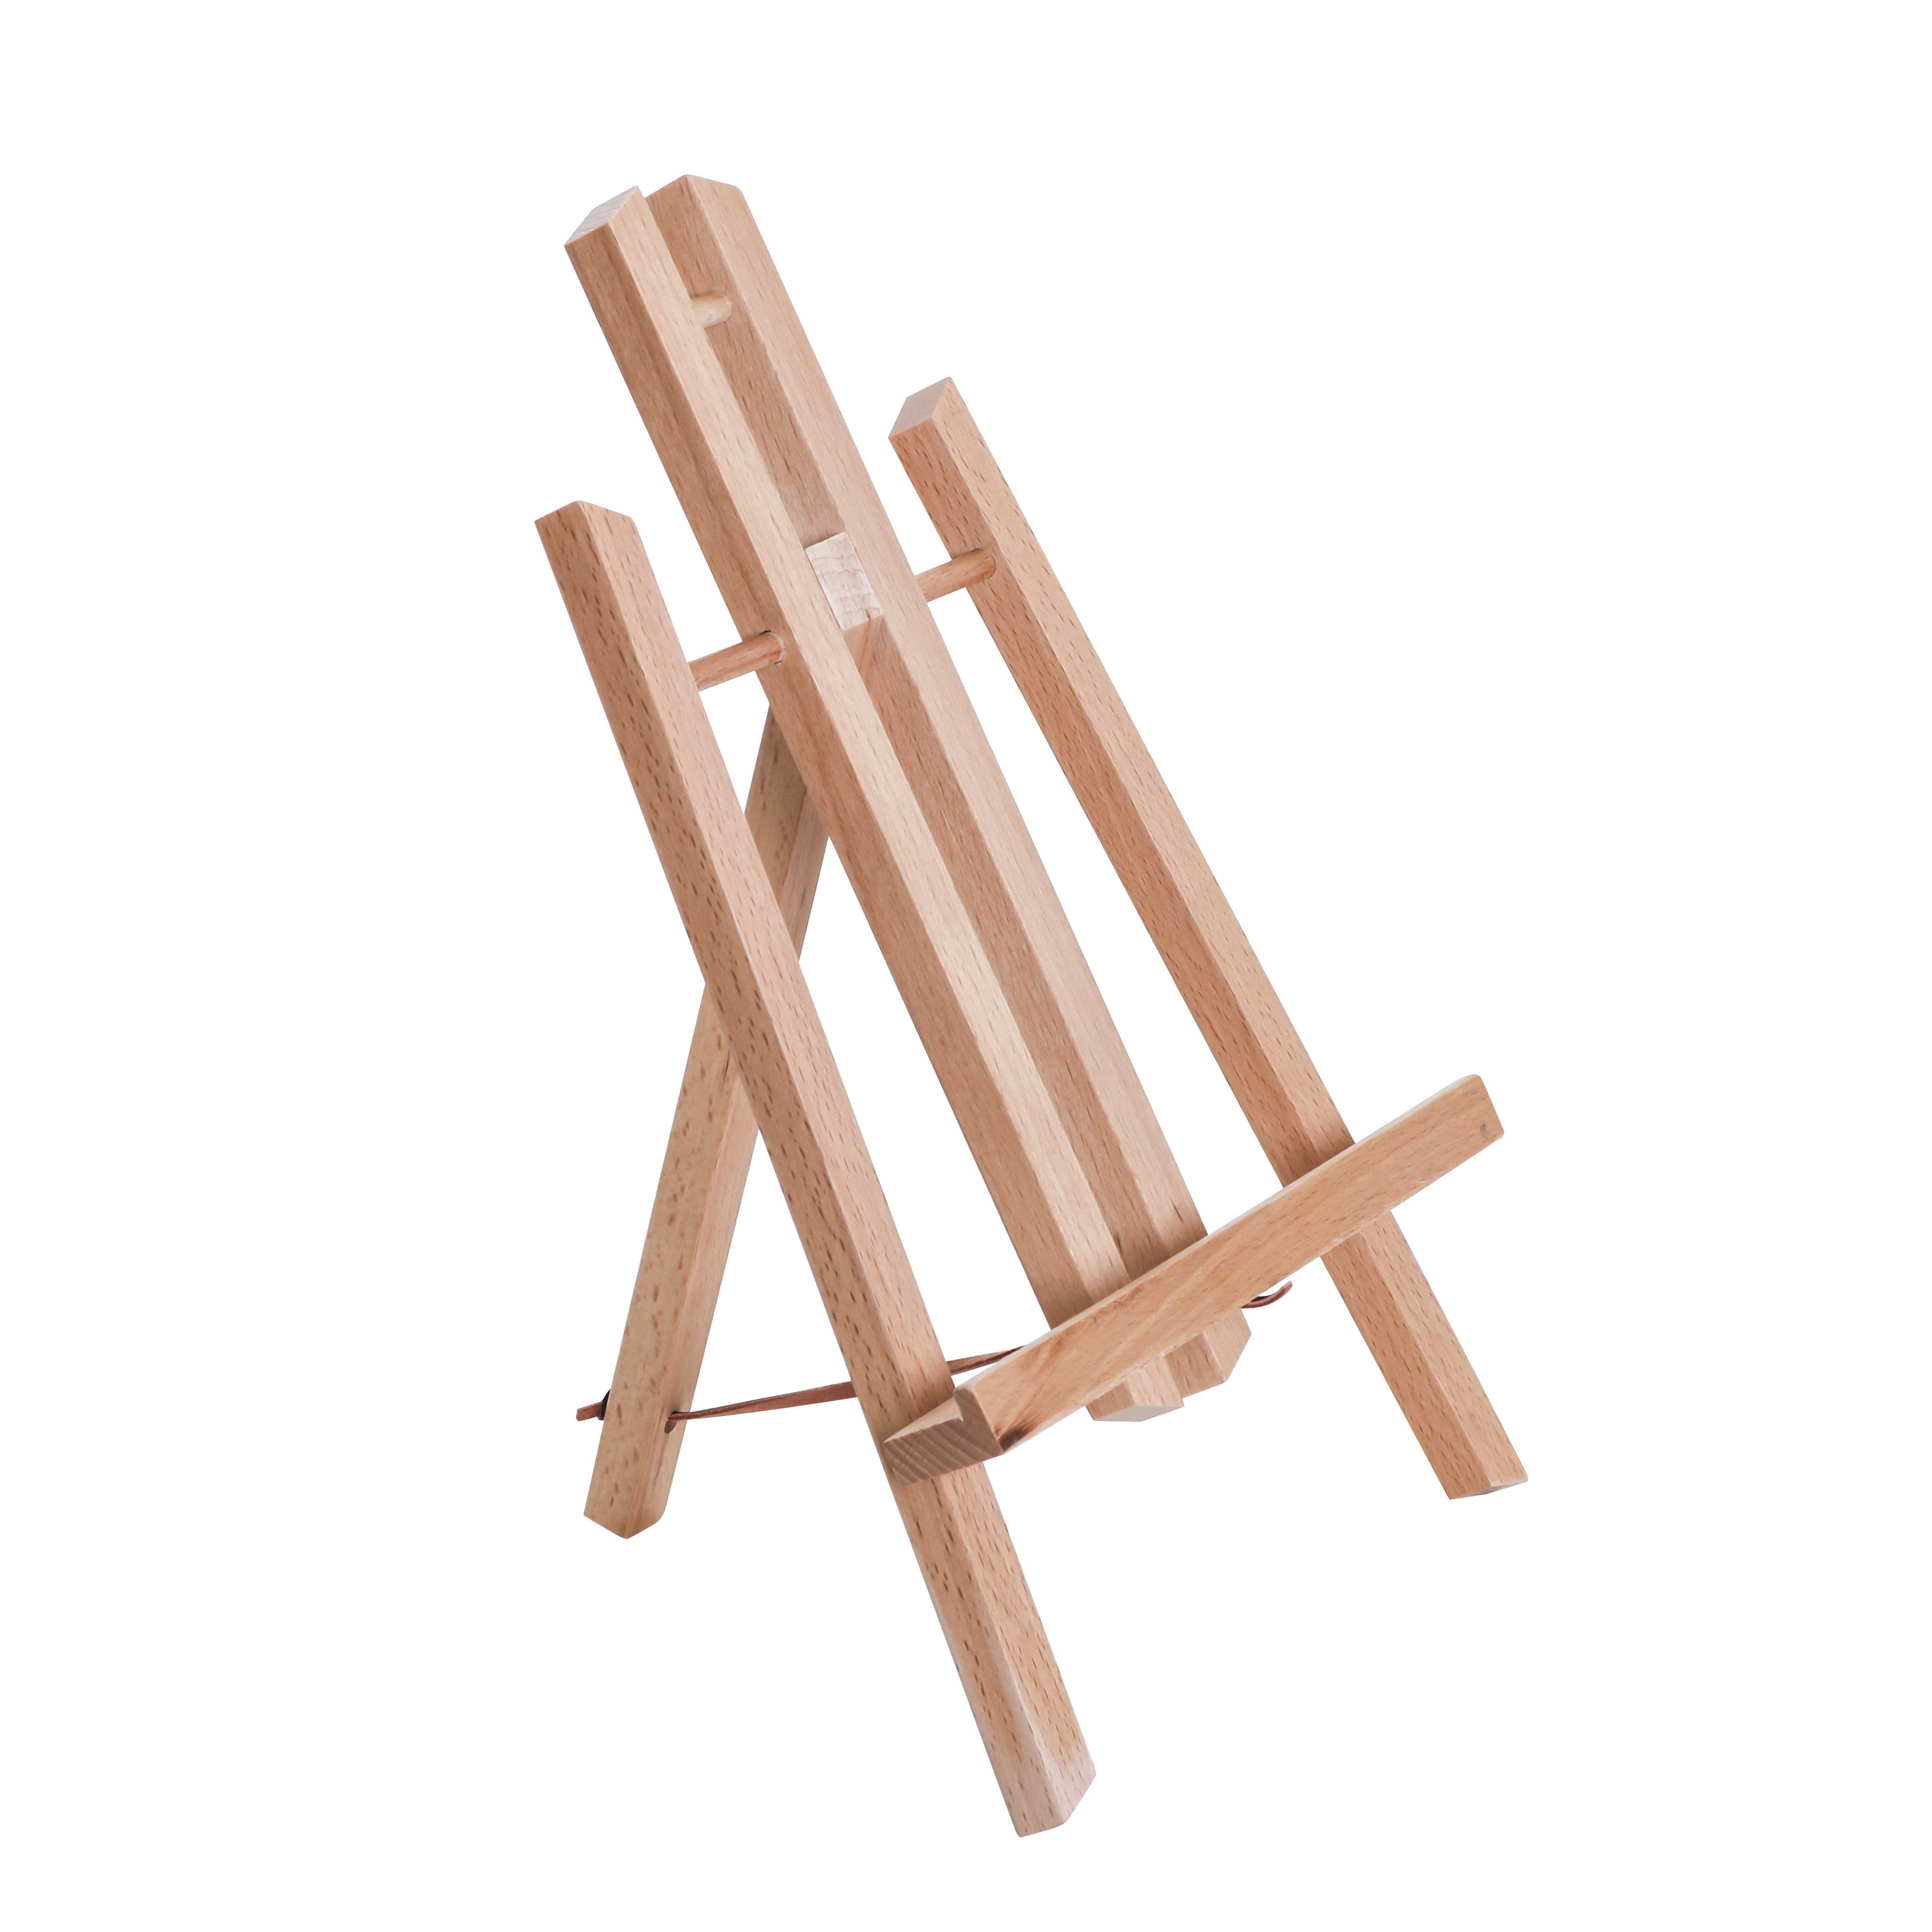 5 Mini Wood Display Easel (24 Pack), A-Frame Artist Tripod Easel - Tabletop  Holder Stand, 5” - 24 Pack - Dillons Food Stores